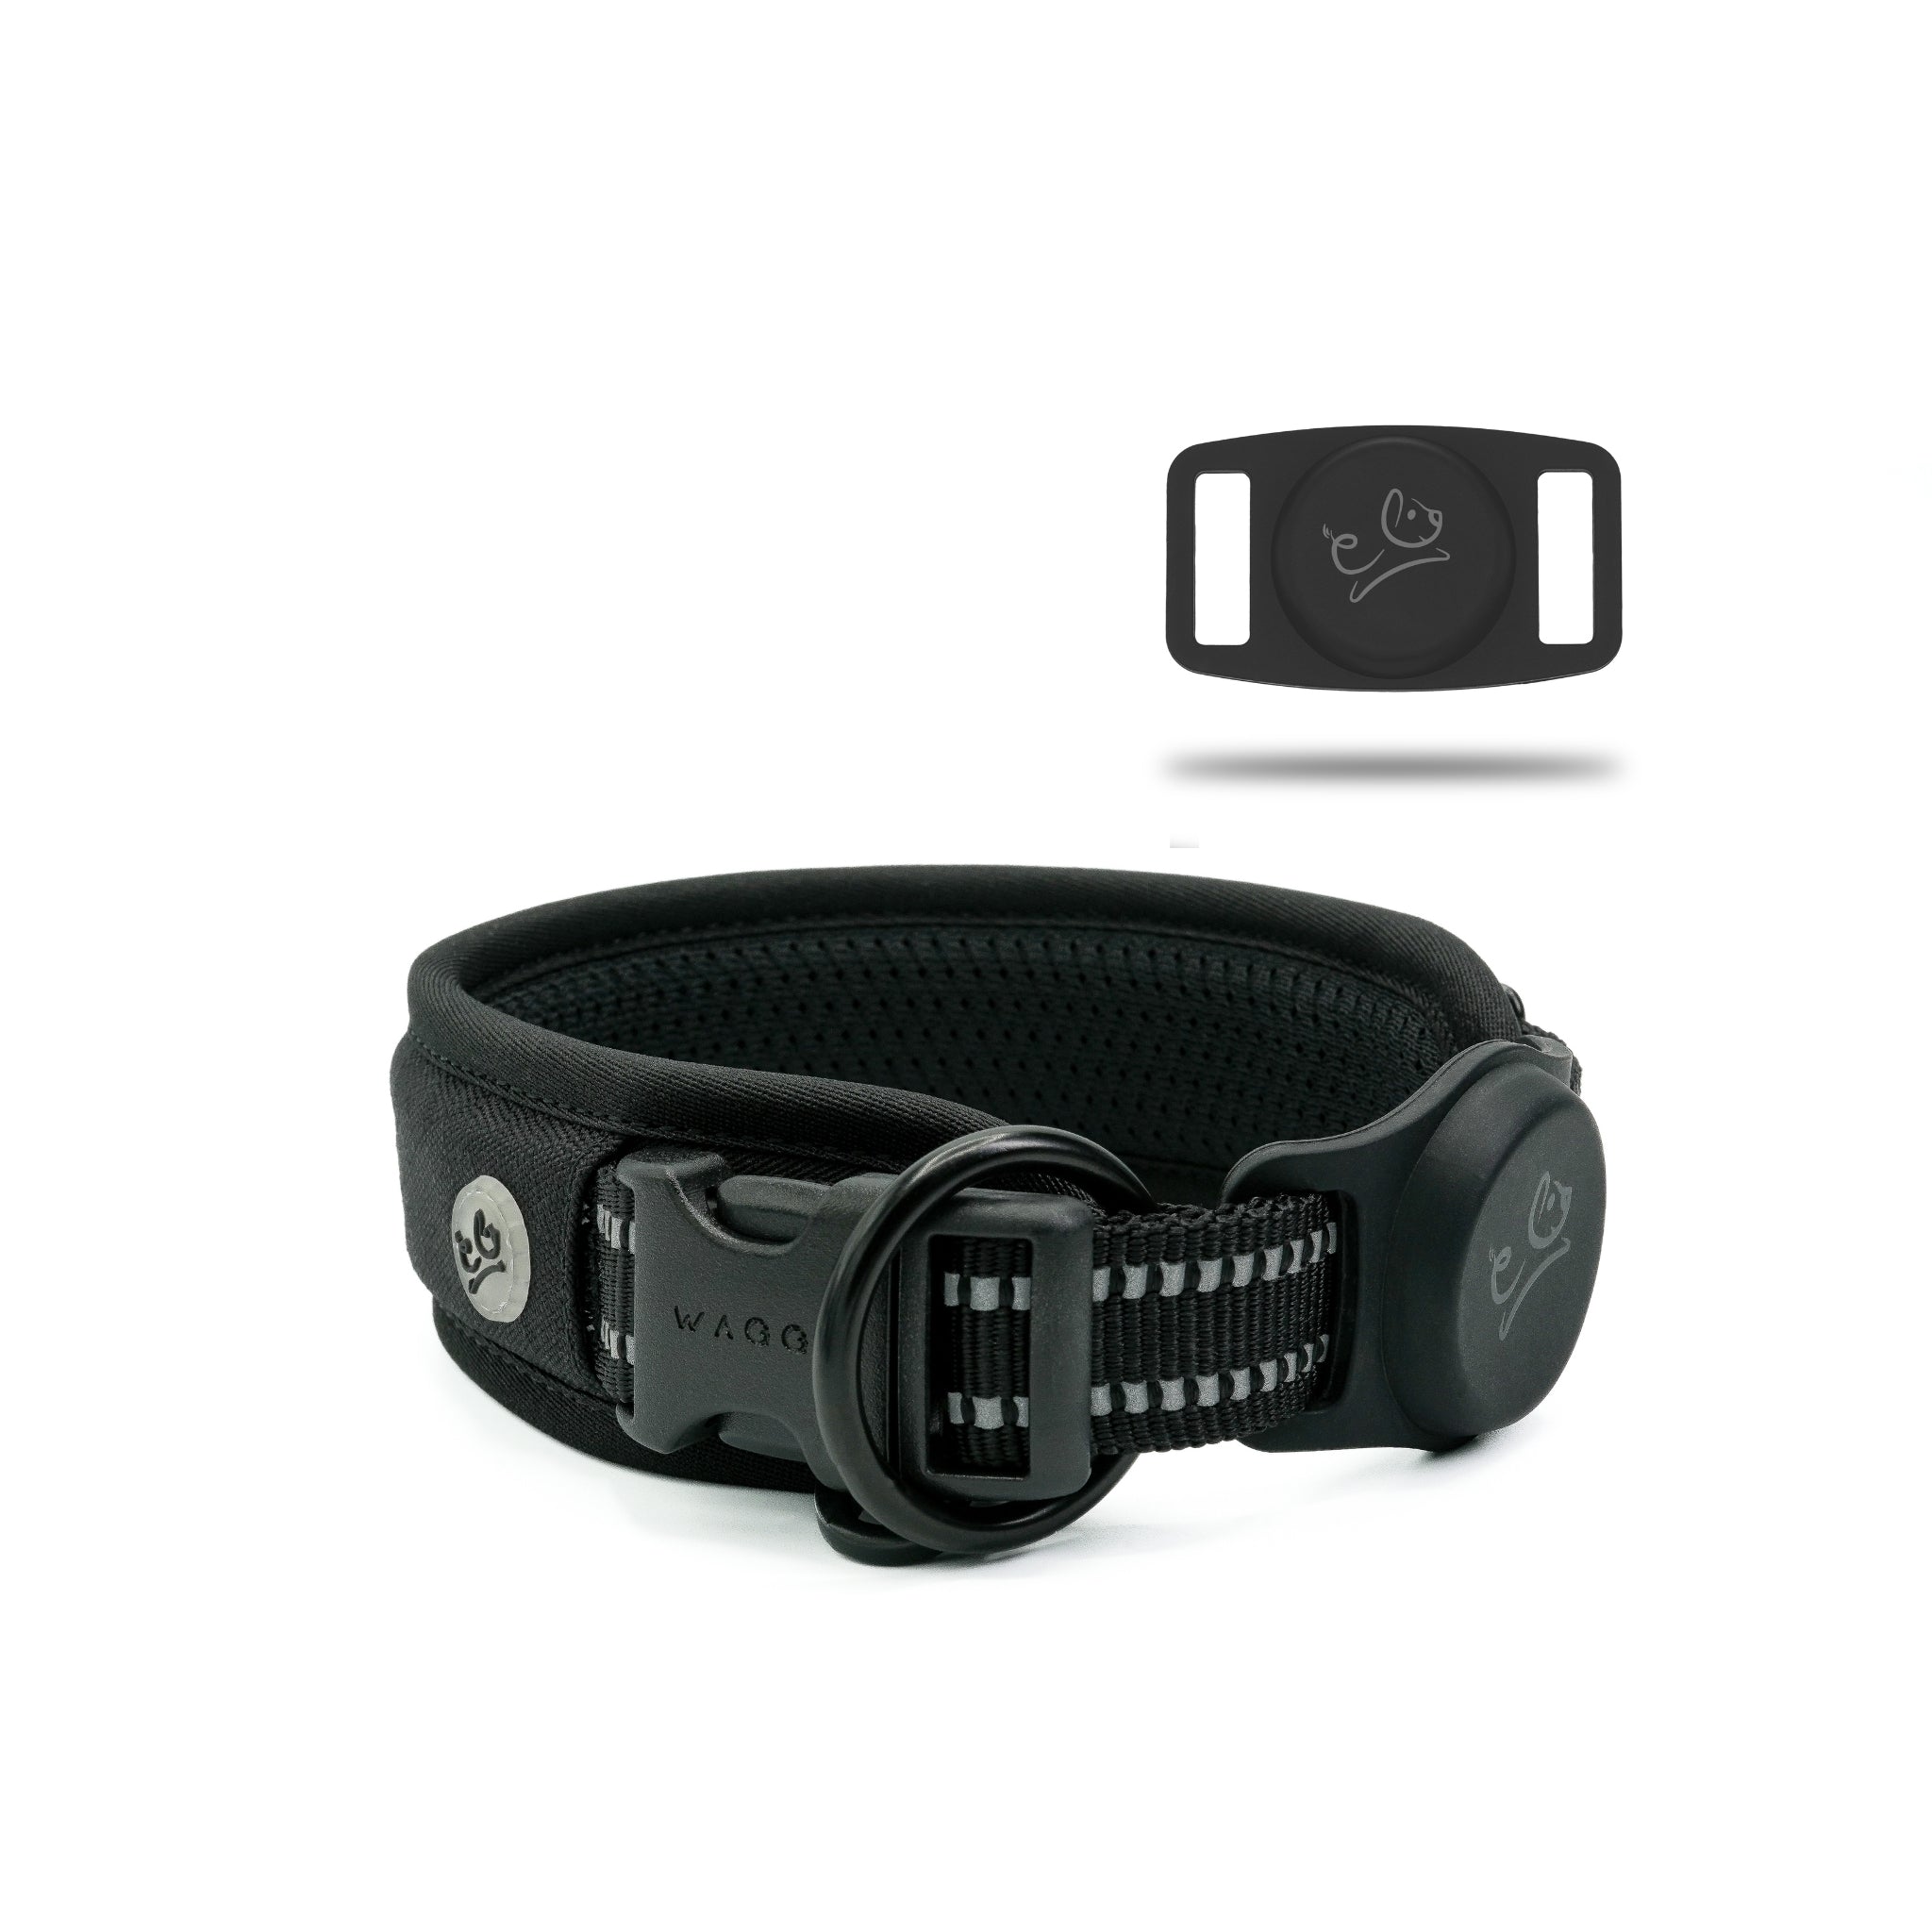 Black Air Mesh dog collar in the center showing details of the 3M reflective stitching  &amp; airtag holder attached to the collar. Airtag holder on the right corner with Waggy logo. 